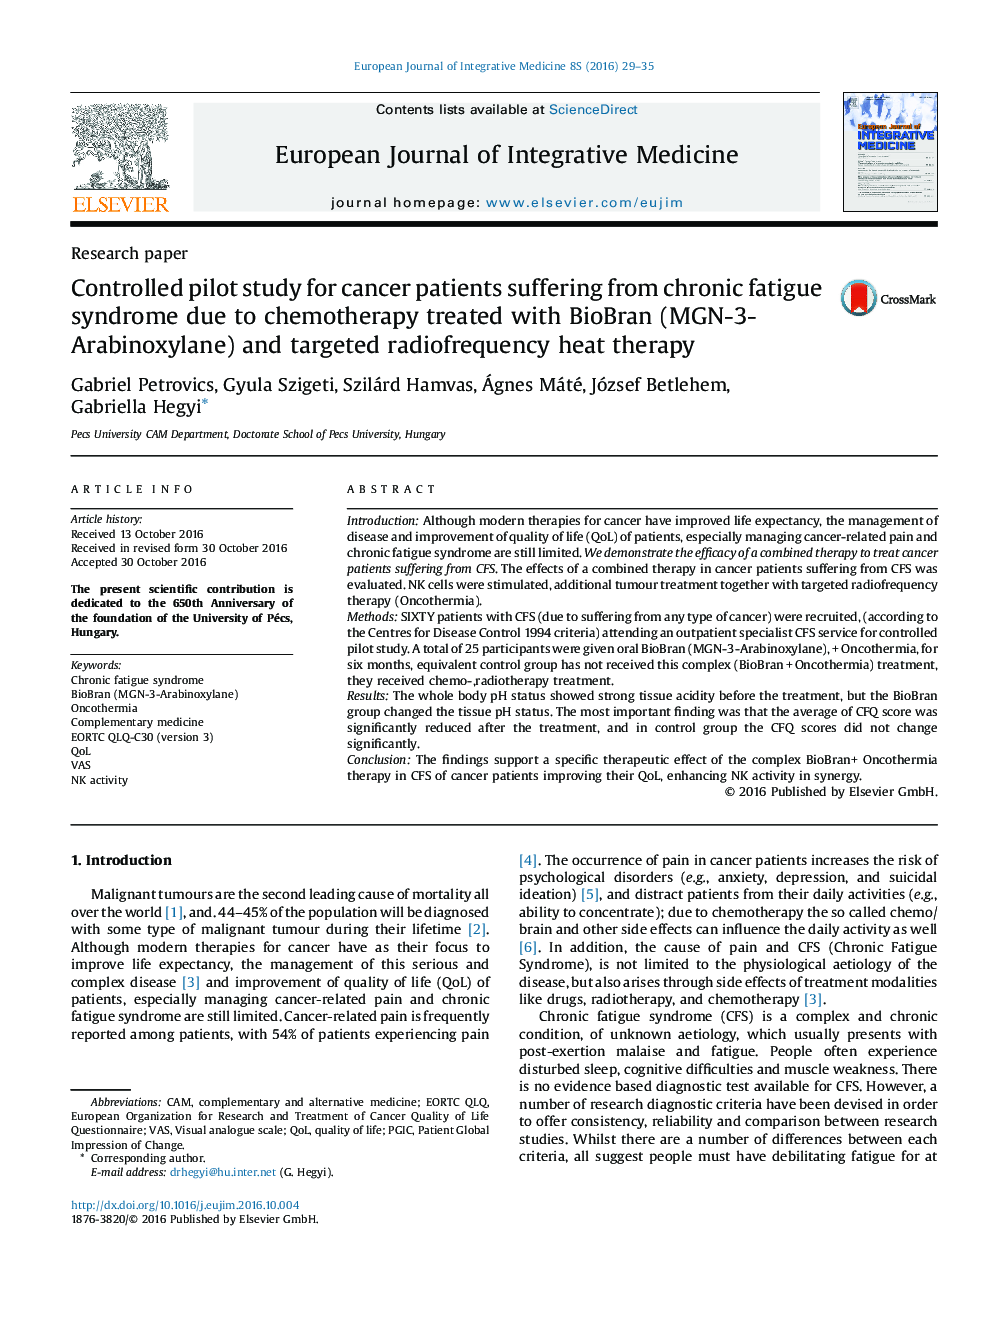 Controlled pilot study for cancer patients suffering from chronic fatigue syndrome due to chemotherapy treated with BioBran (MGN-3-Arabinoxylane) and targeted radiofrequency heat therapy